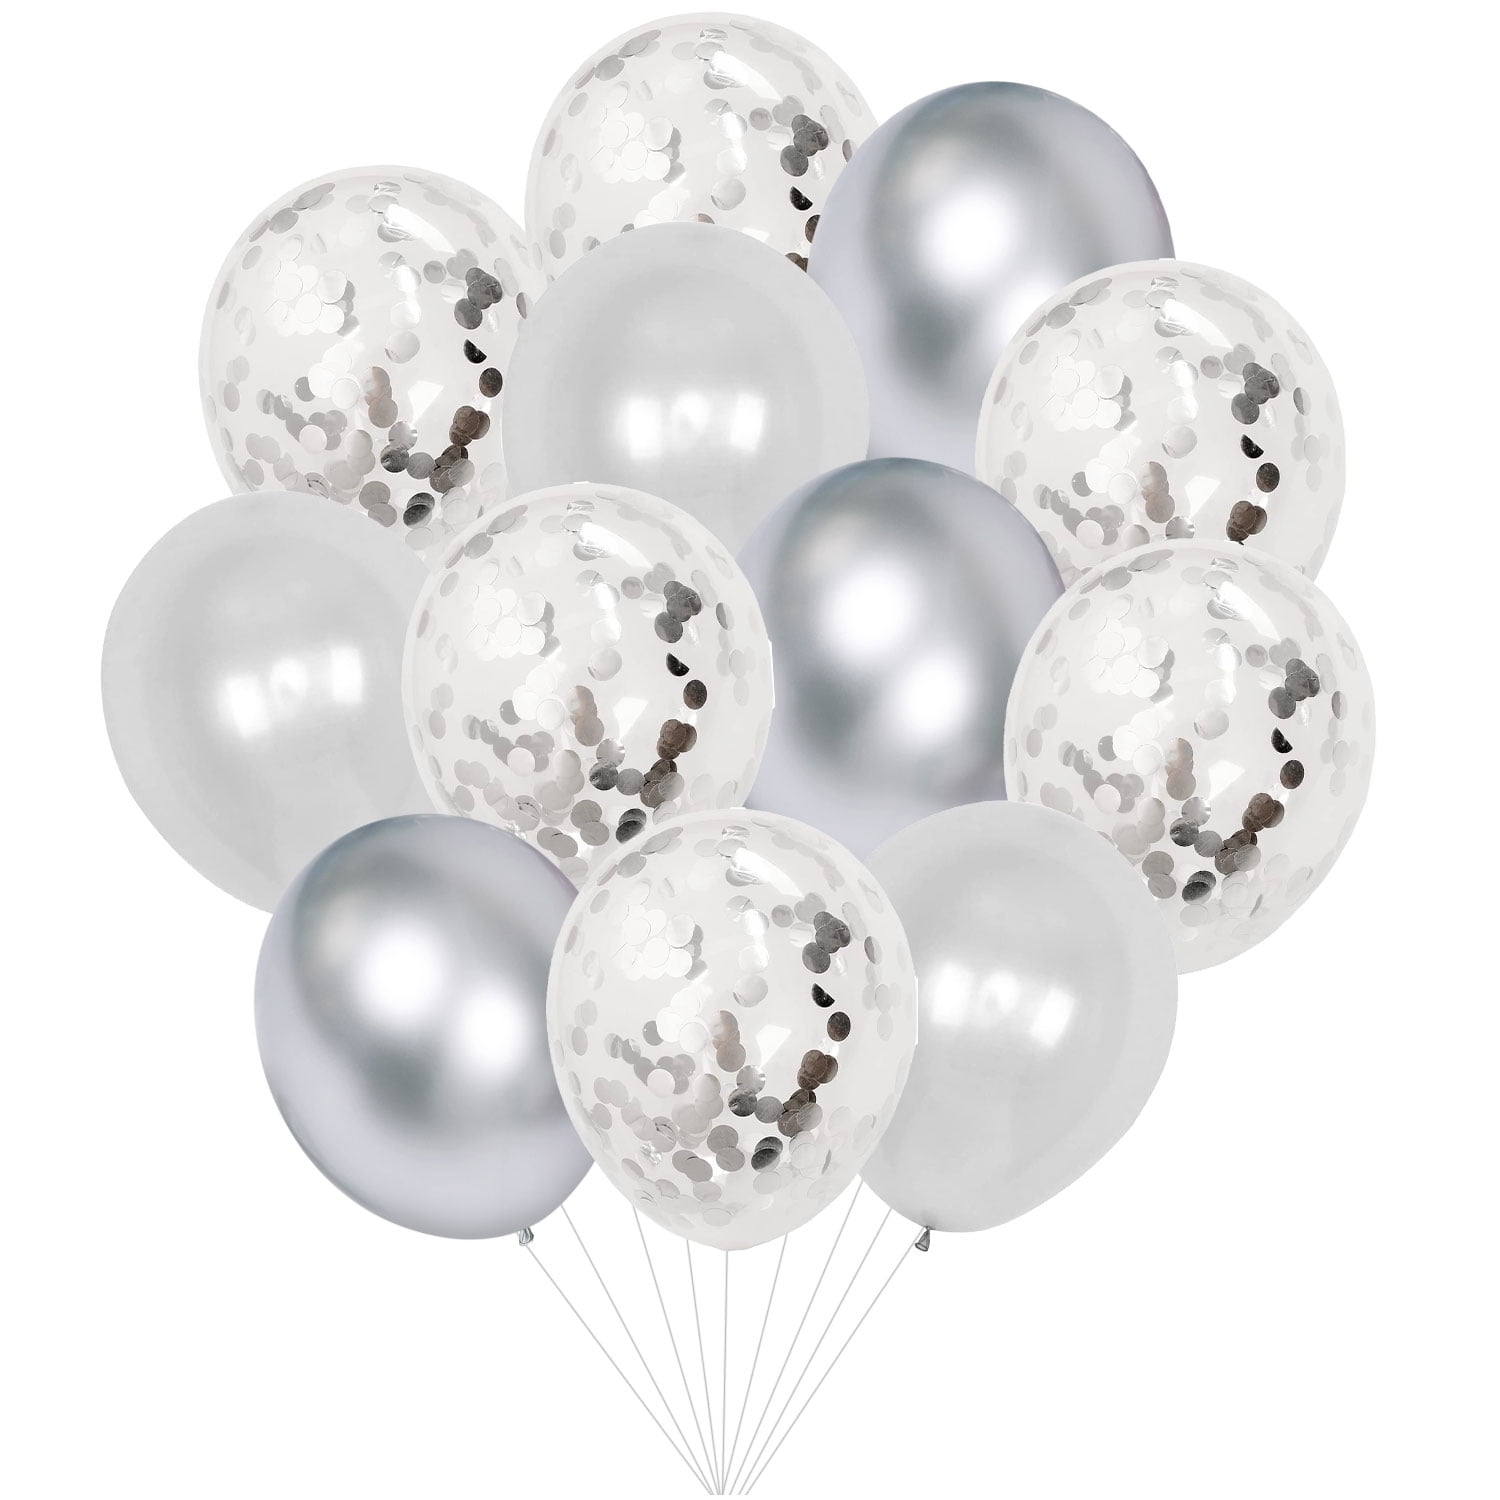 Birthday Balloons - Mylar, Confetti Filled, and Latex